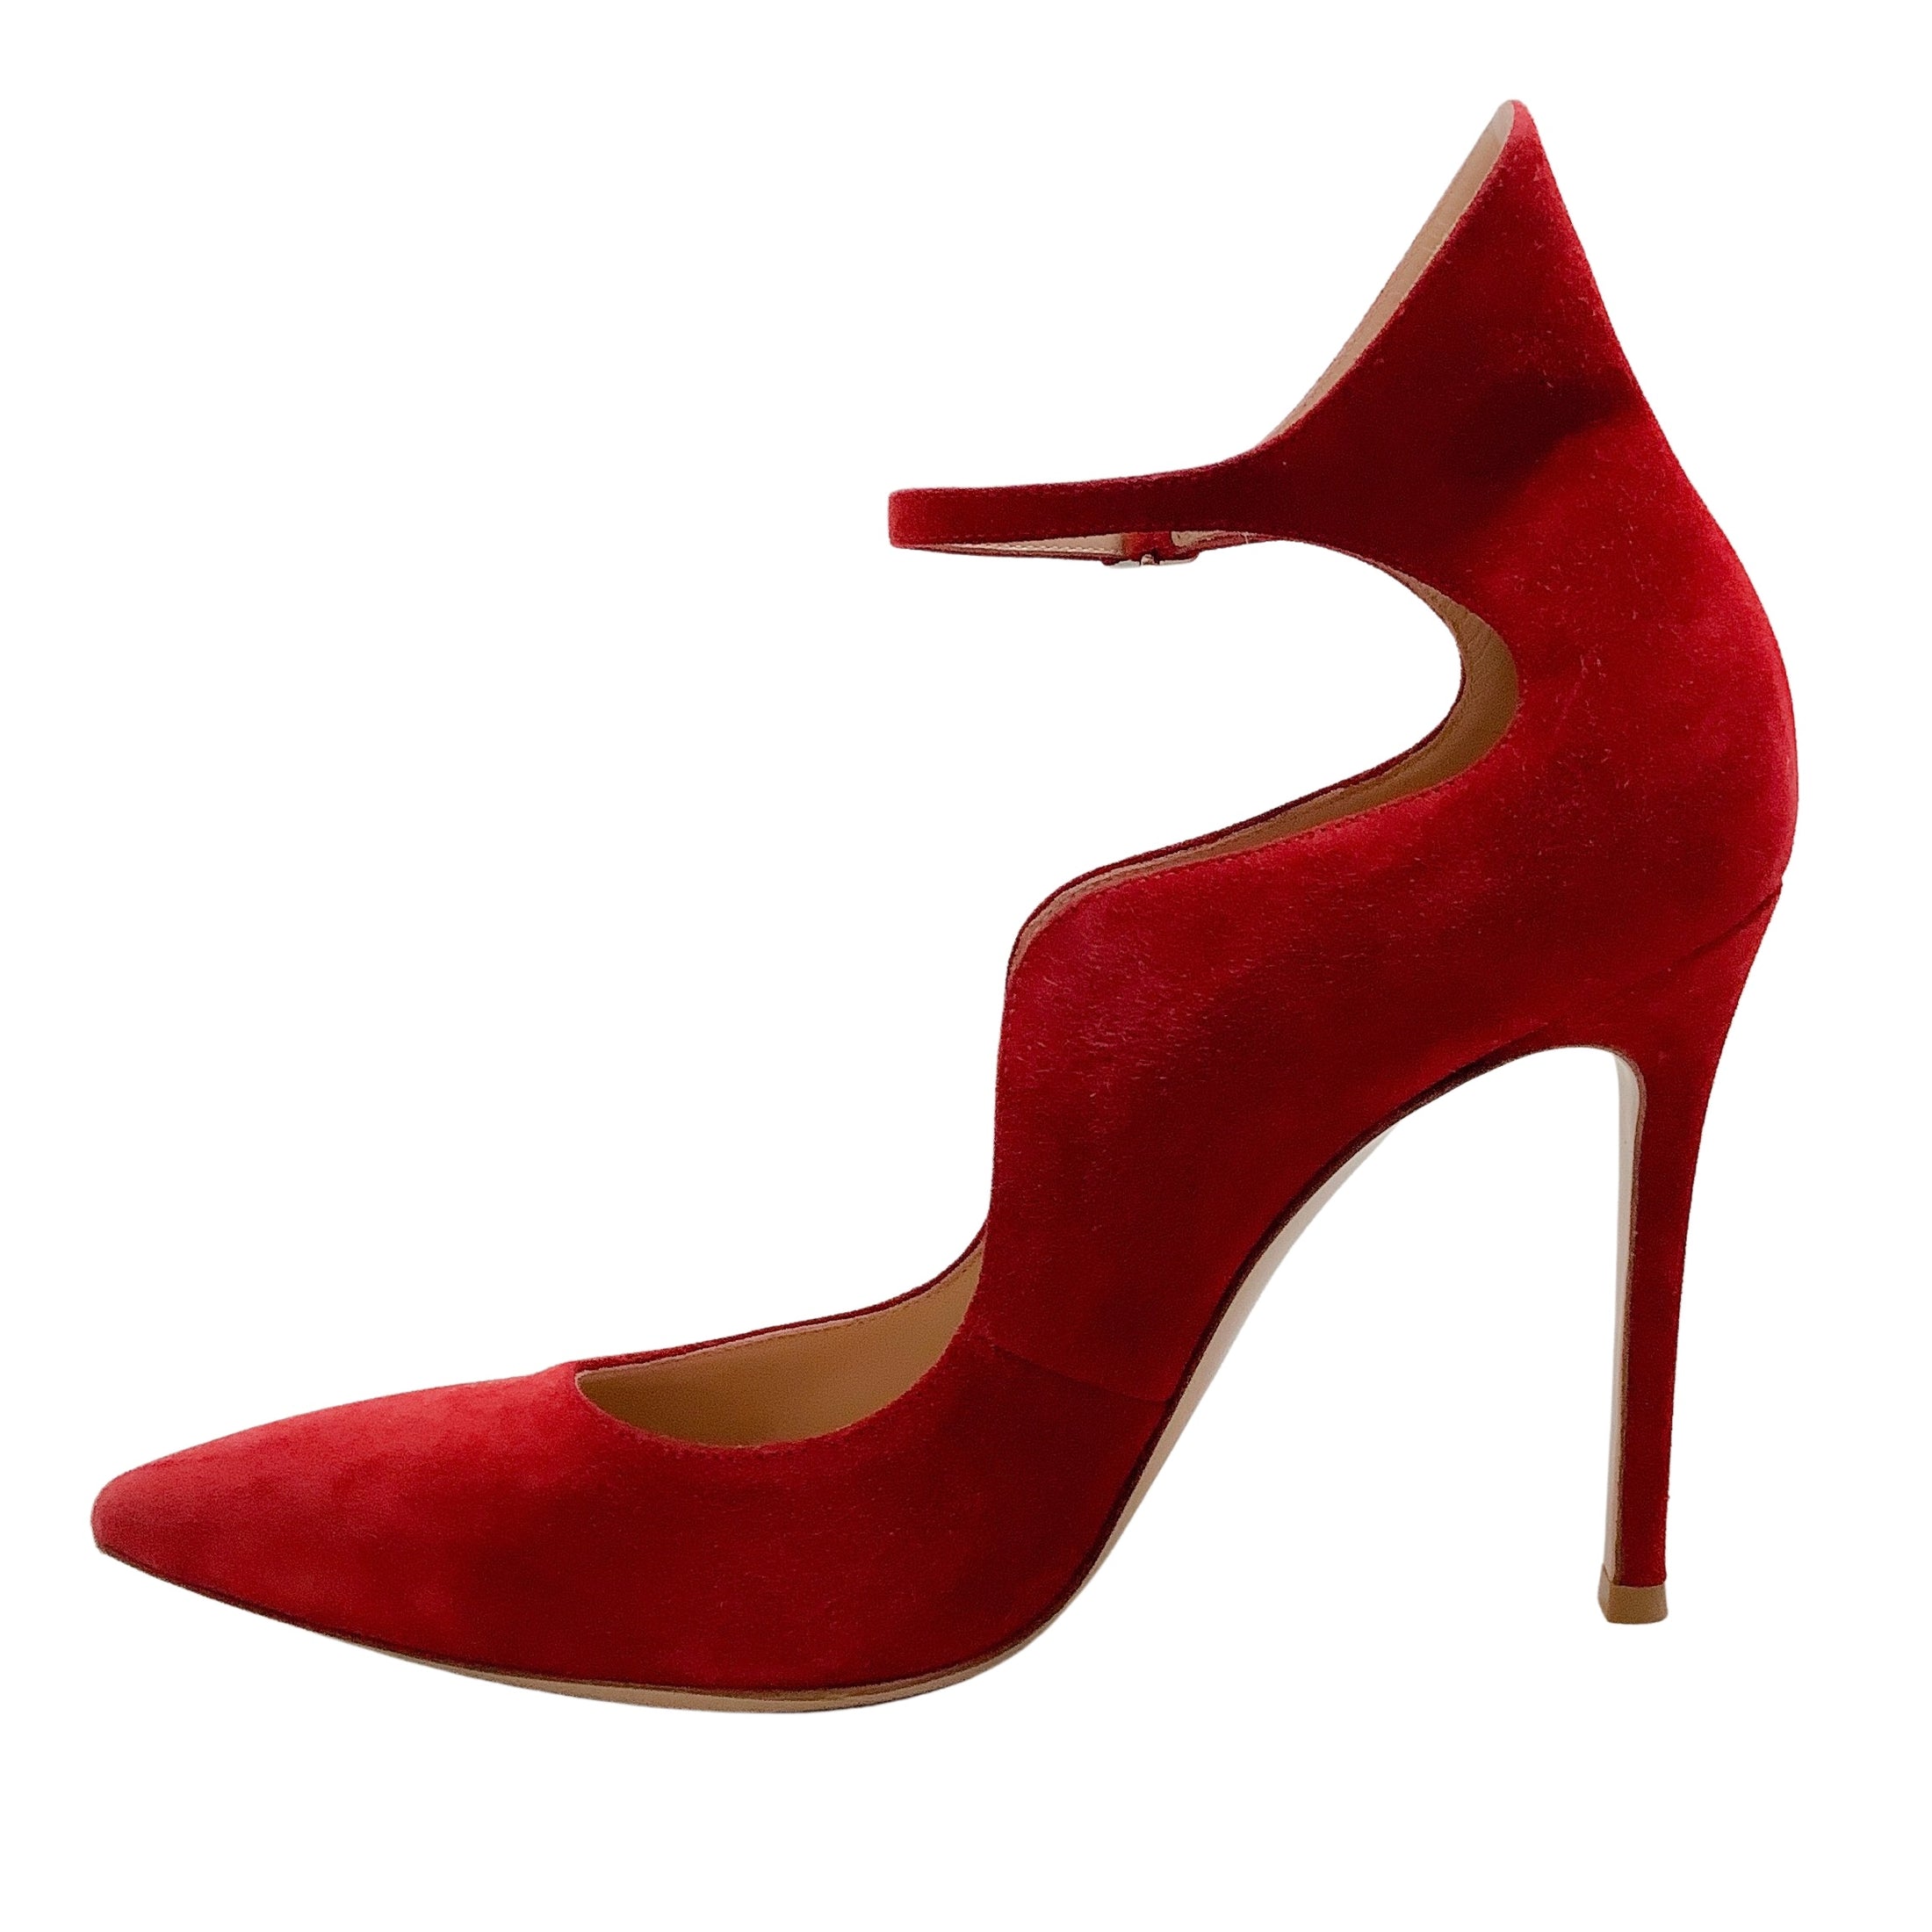 Gianvito Rossi Red Suede Pumps with Ankle Strap